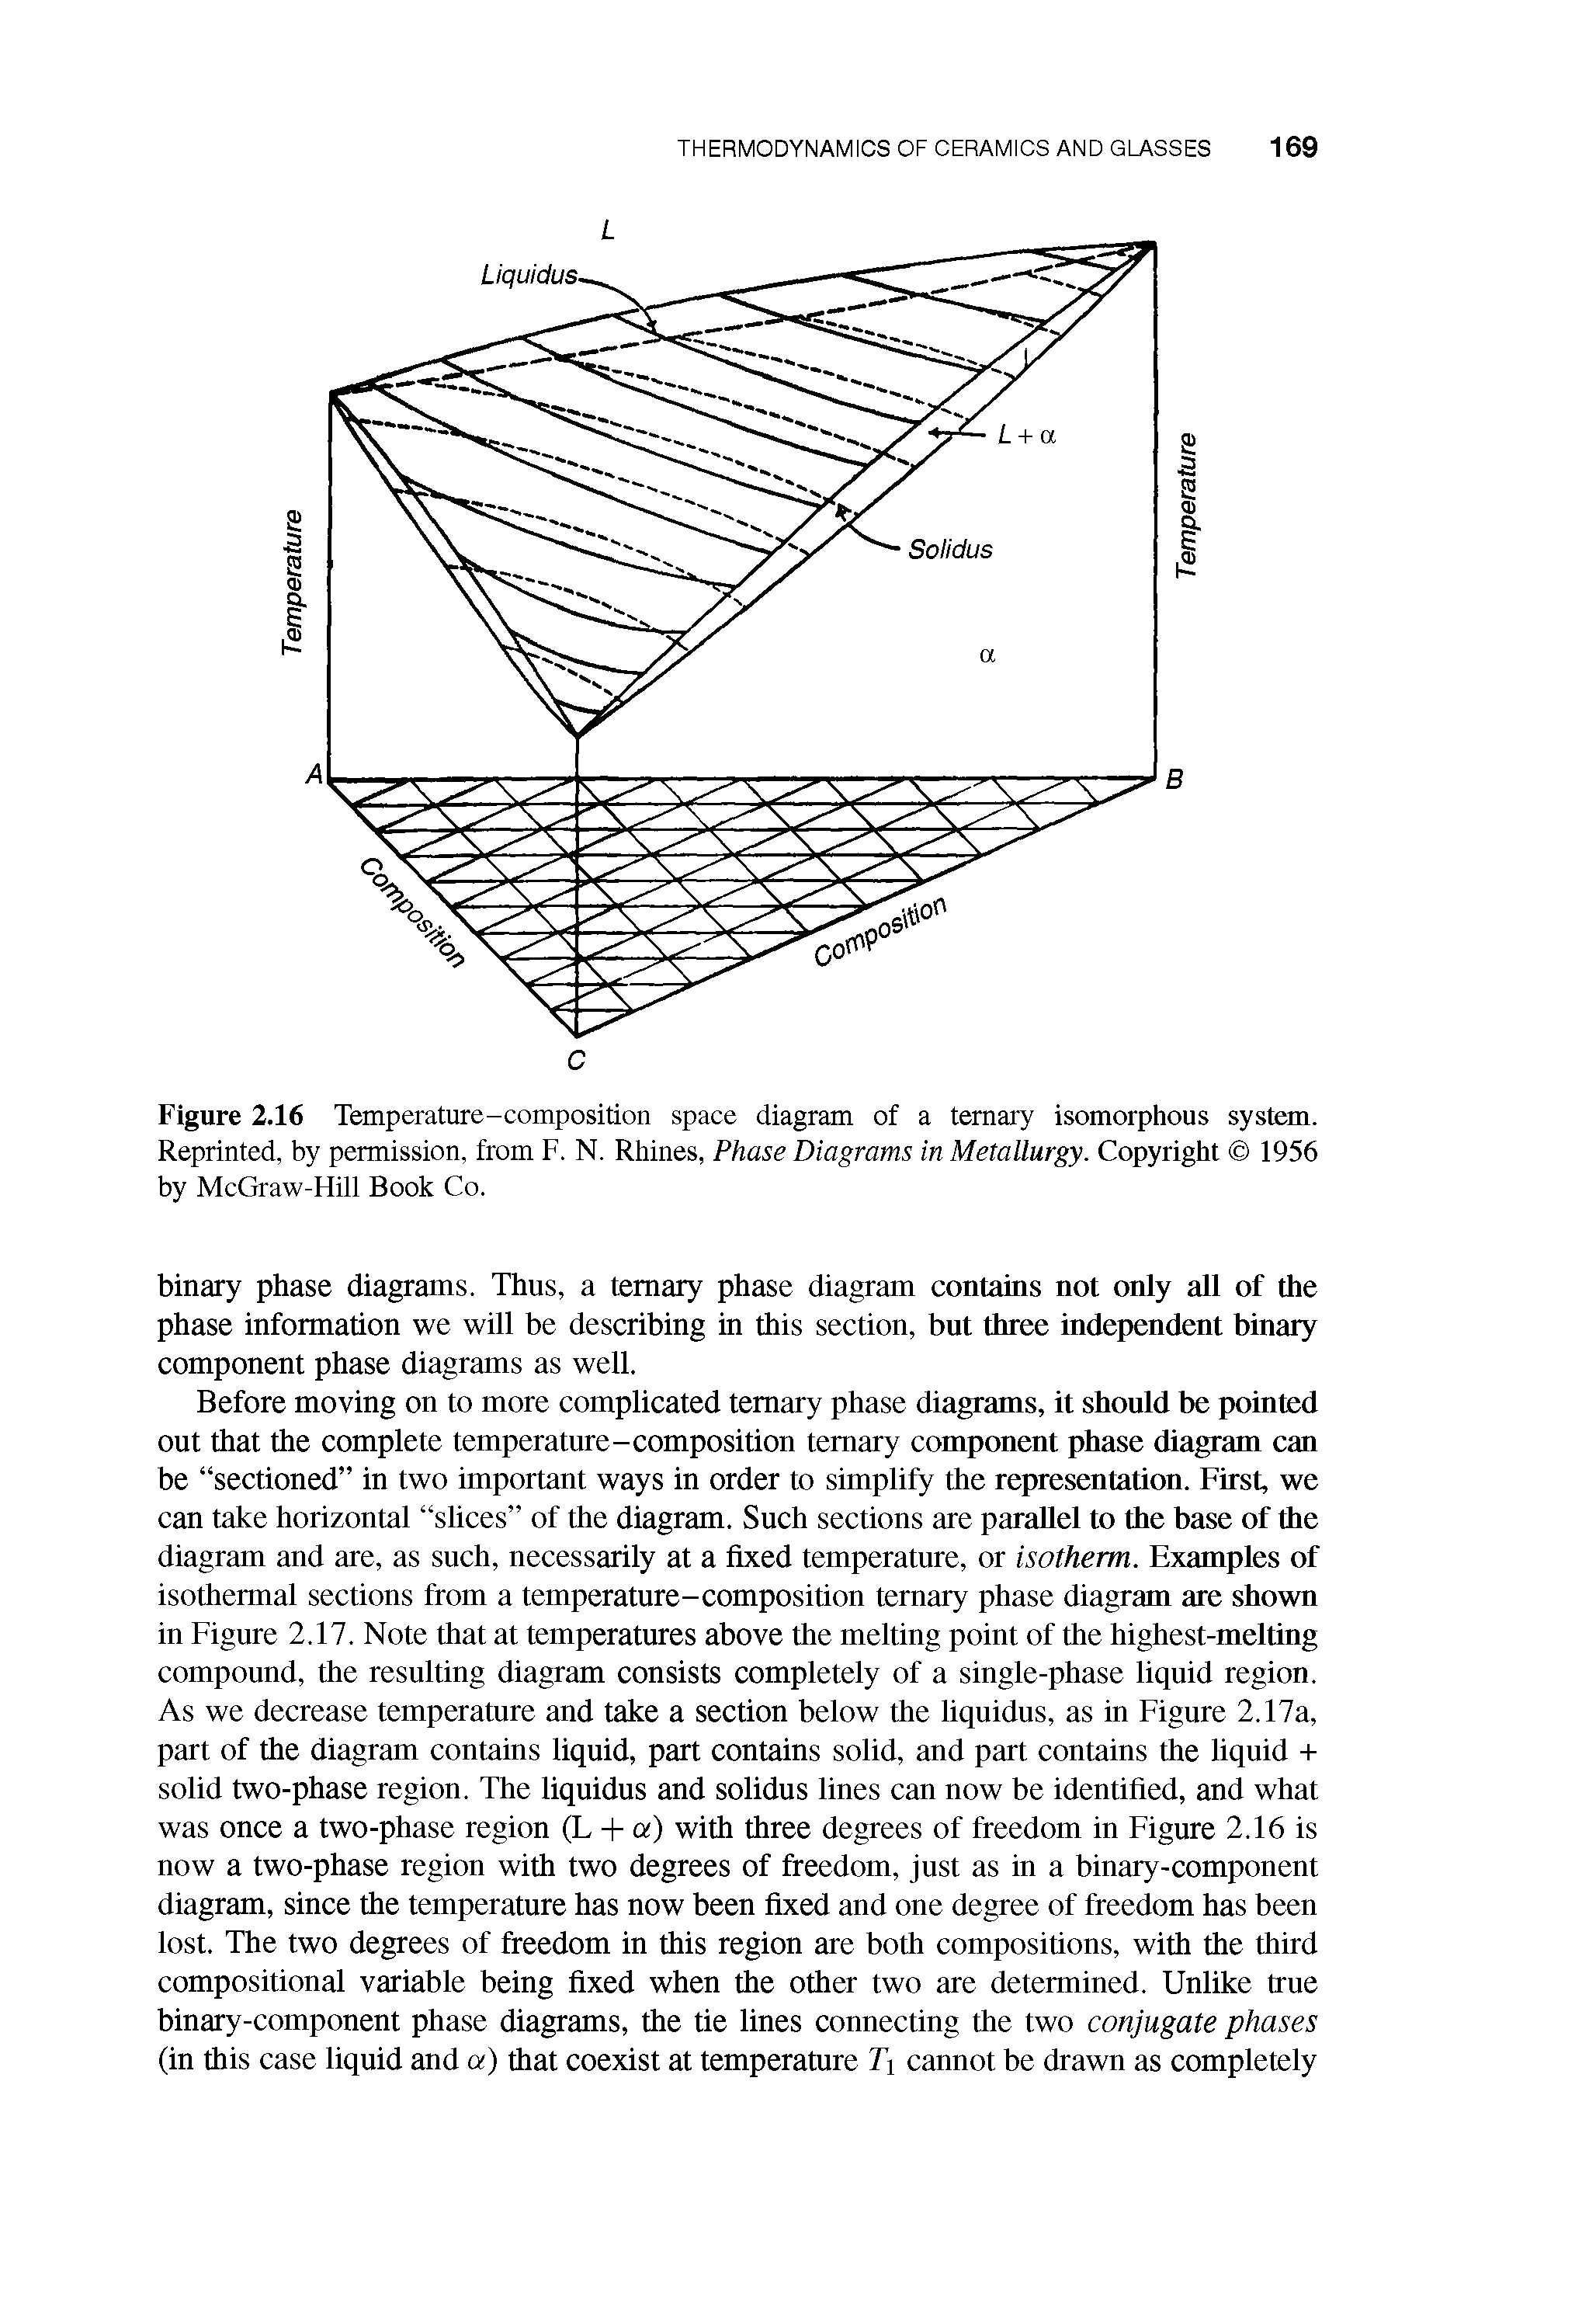 Figure 2.16 Temperature-composition space diagram of a ternary isomorphous system. Reprinted, by permission, from F. N. Rhines, Phase Diagrams in Metallurgy. Copyright 1956 by McGraw-Hill Book Co.